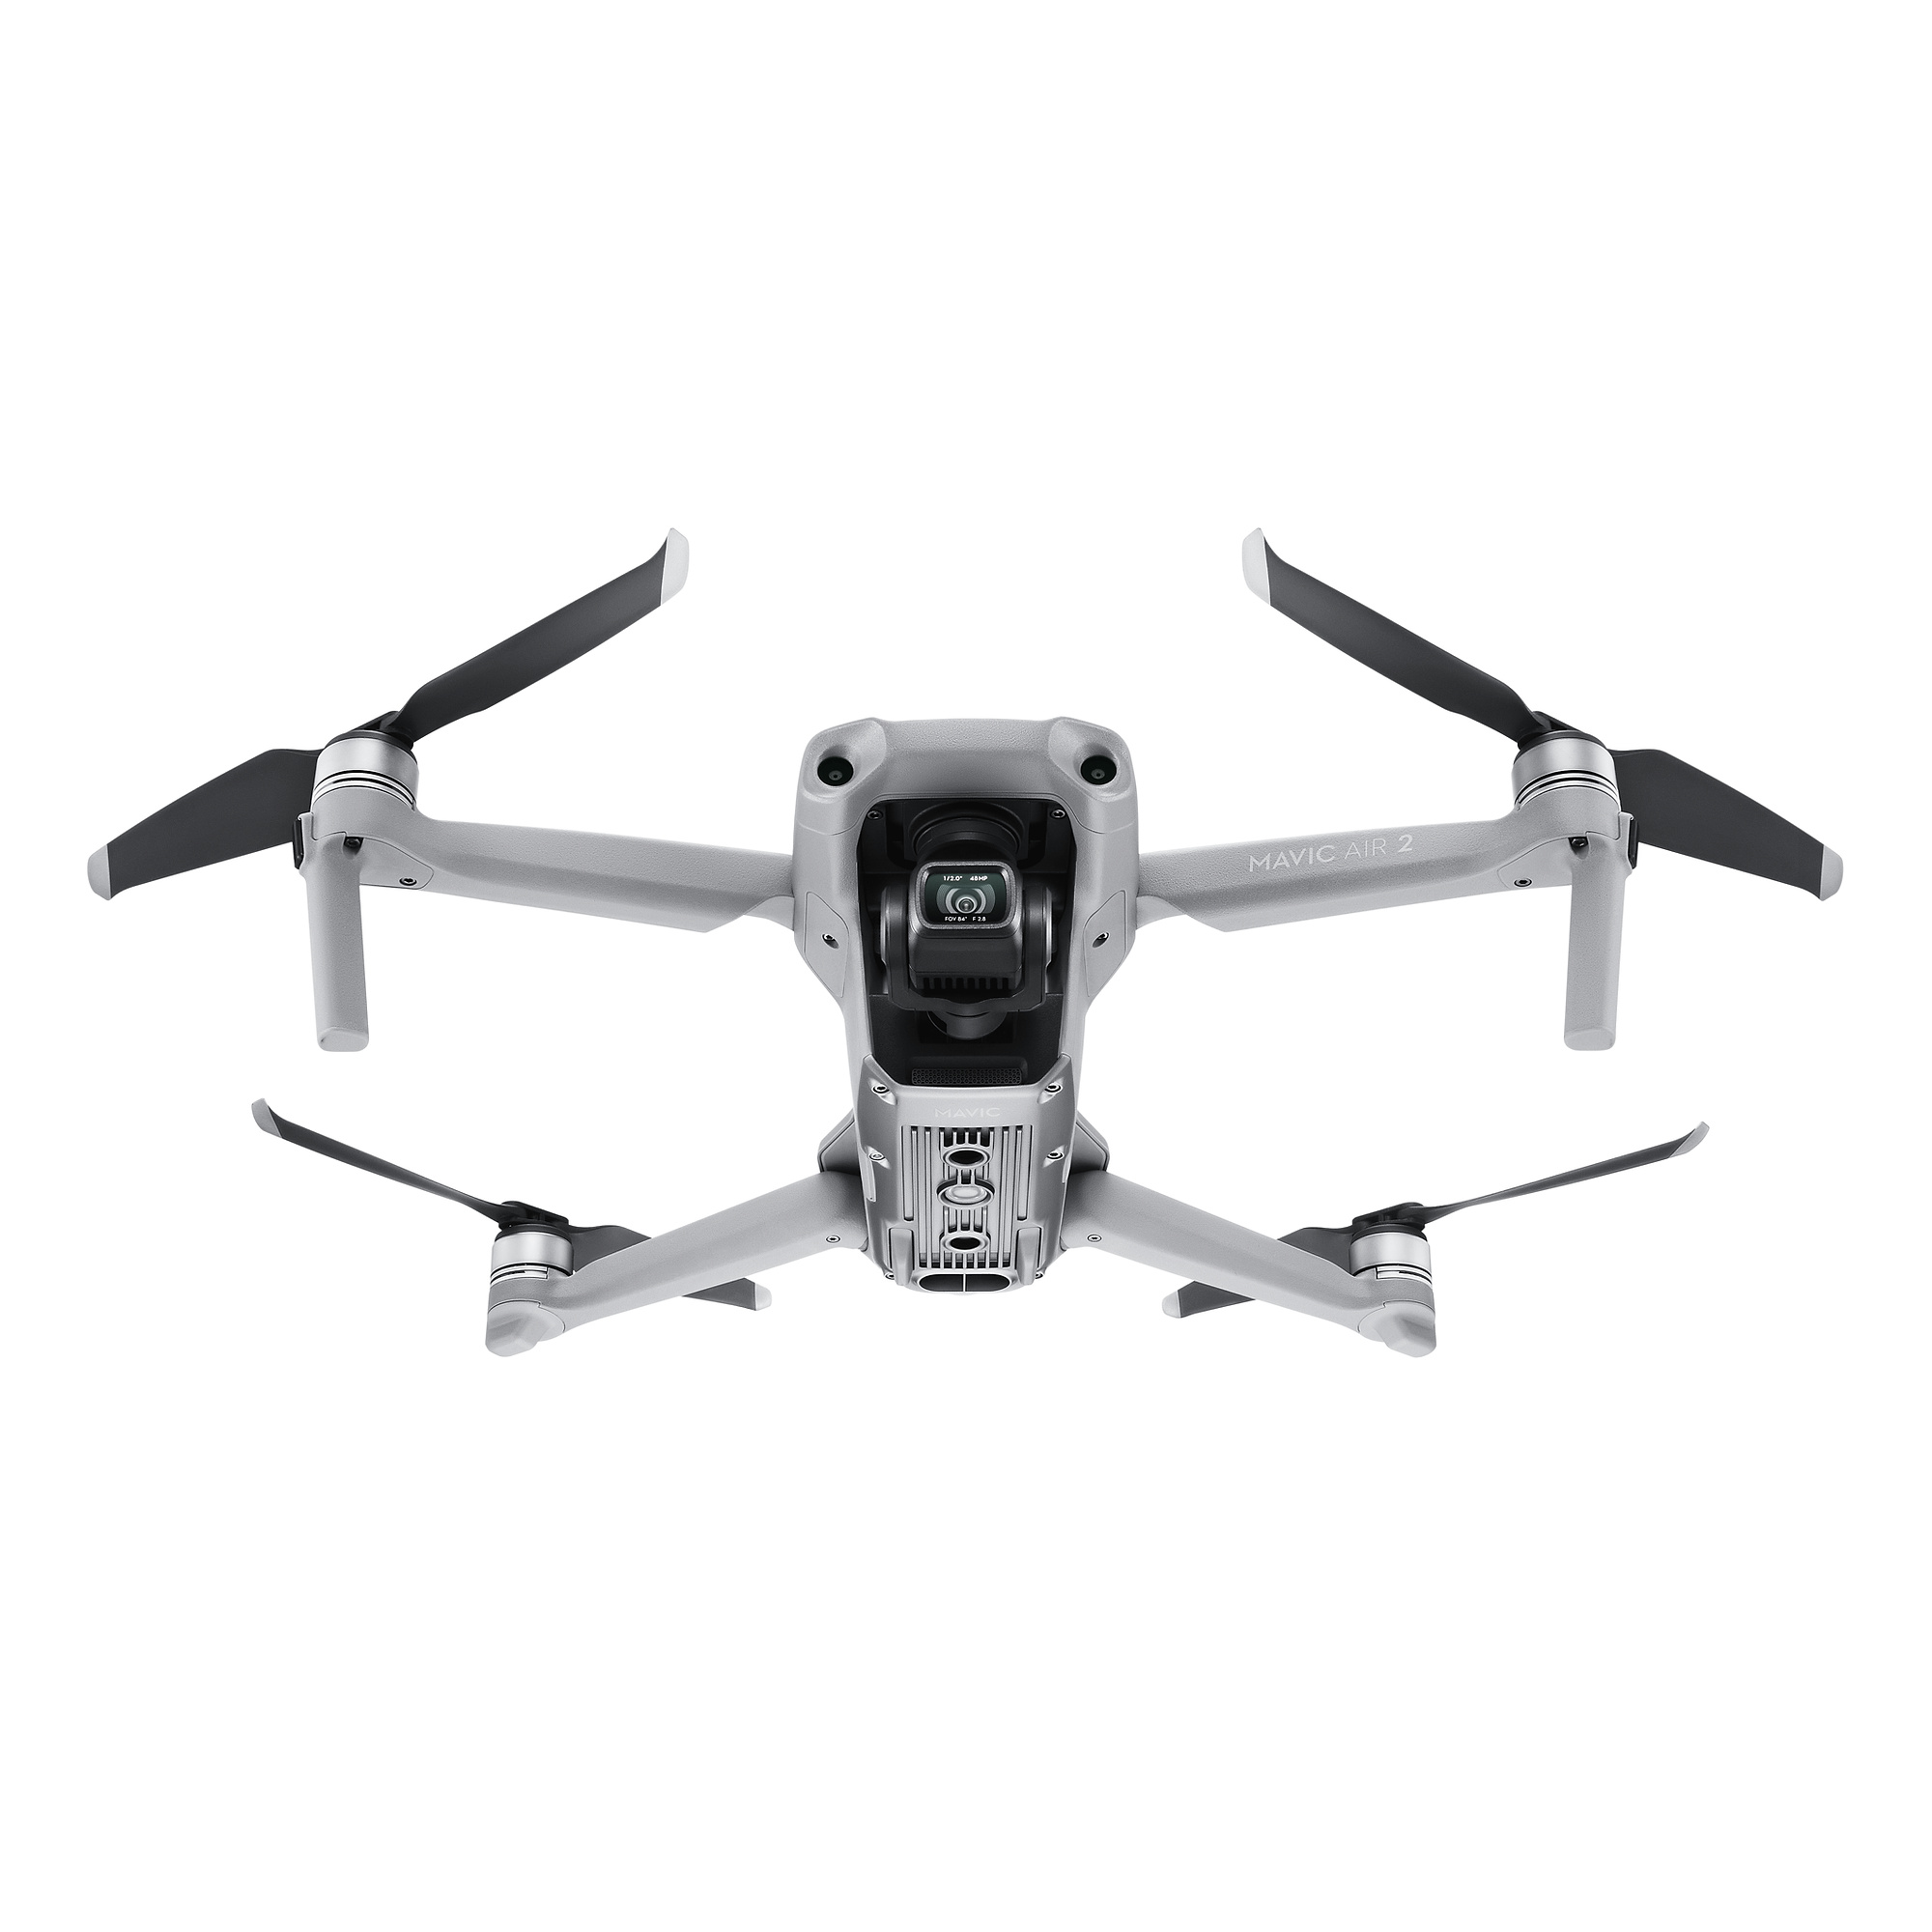 DJI Mavic Air Fly More Combo Price Online in Lagos and Abuja Nigeria